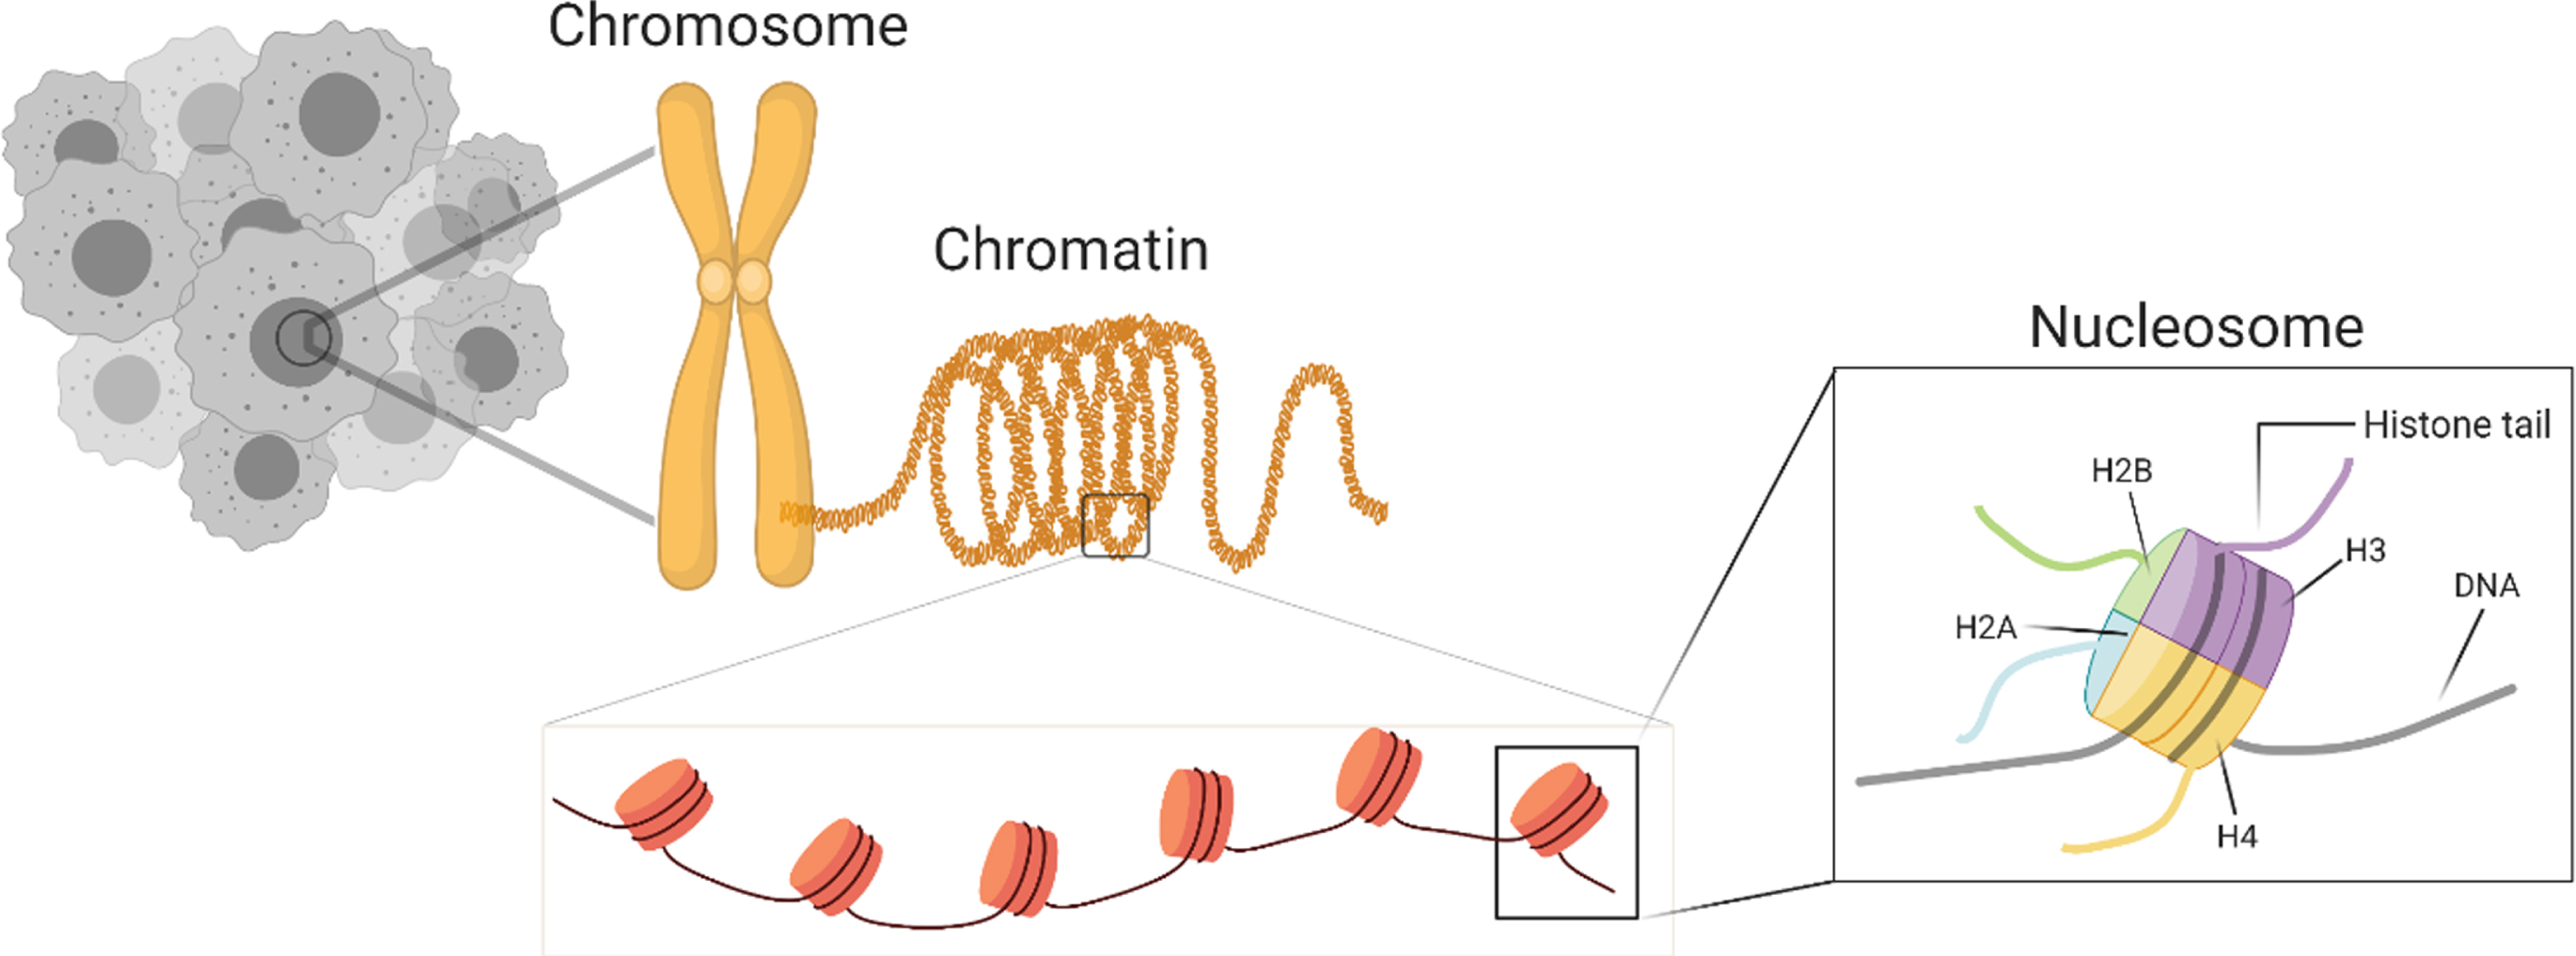 Overview of chromatin organization in a nucleus.